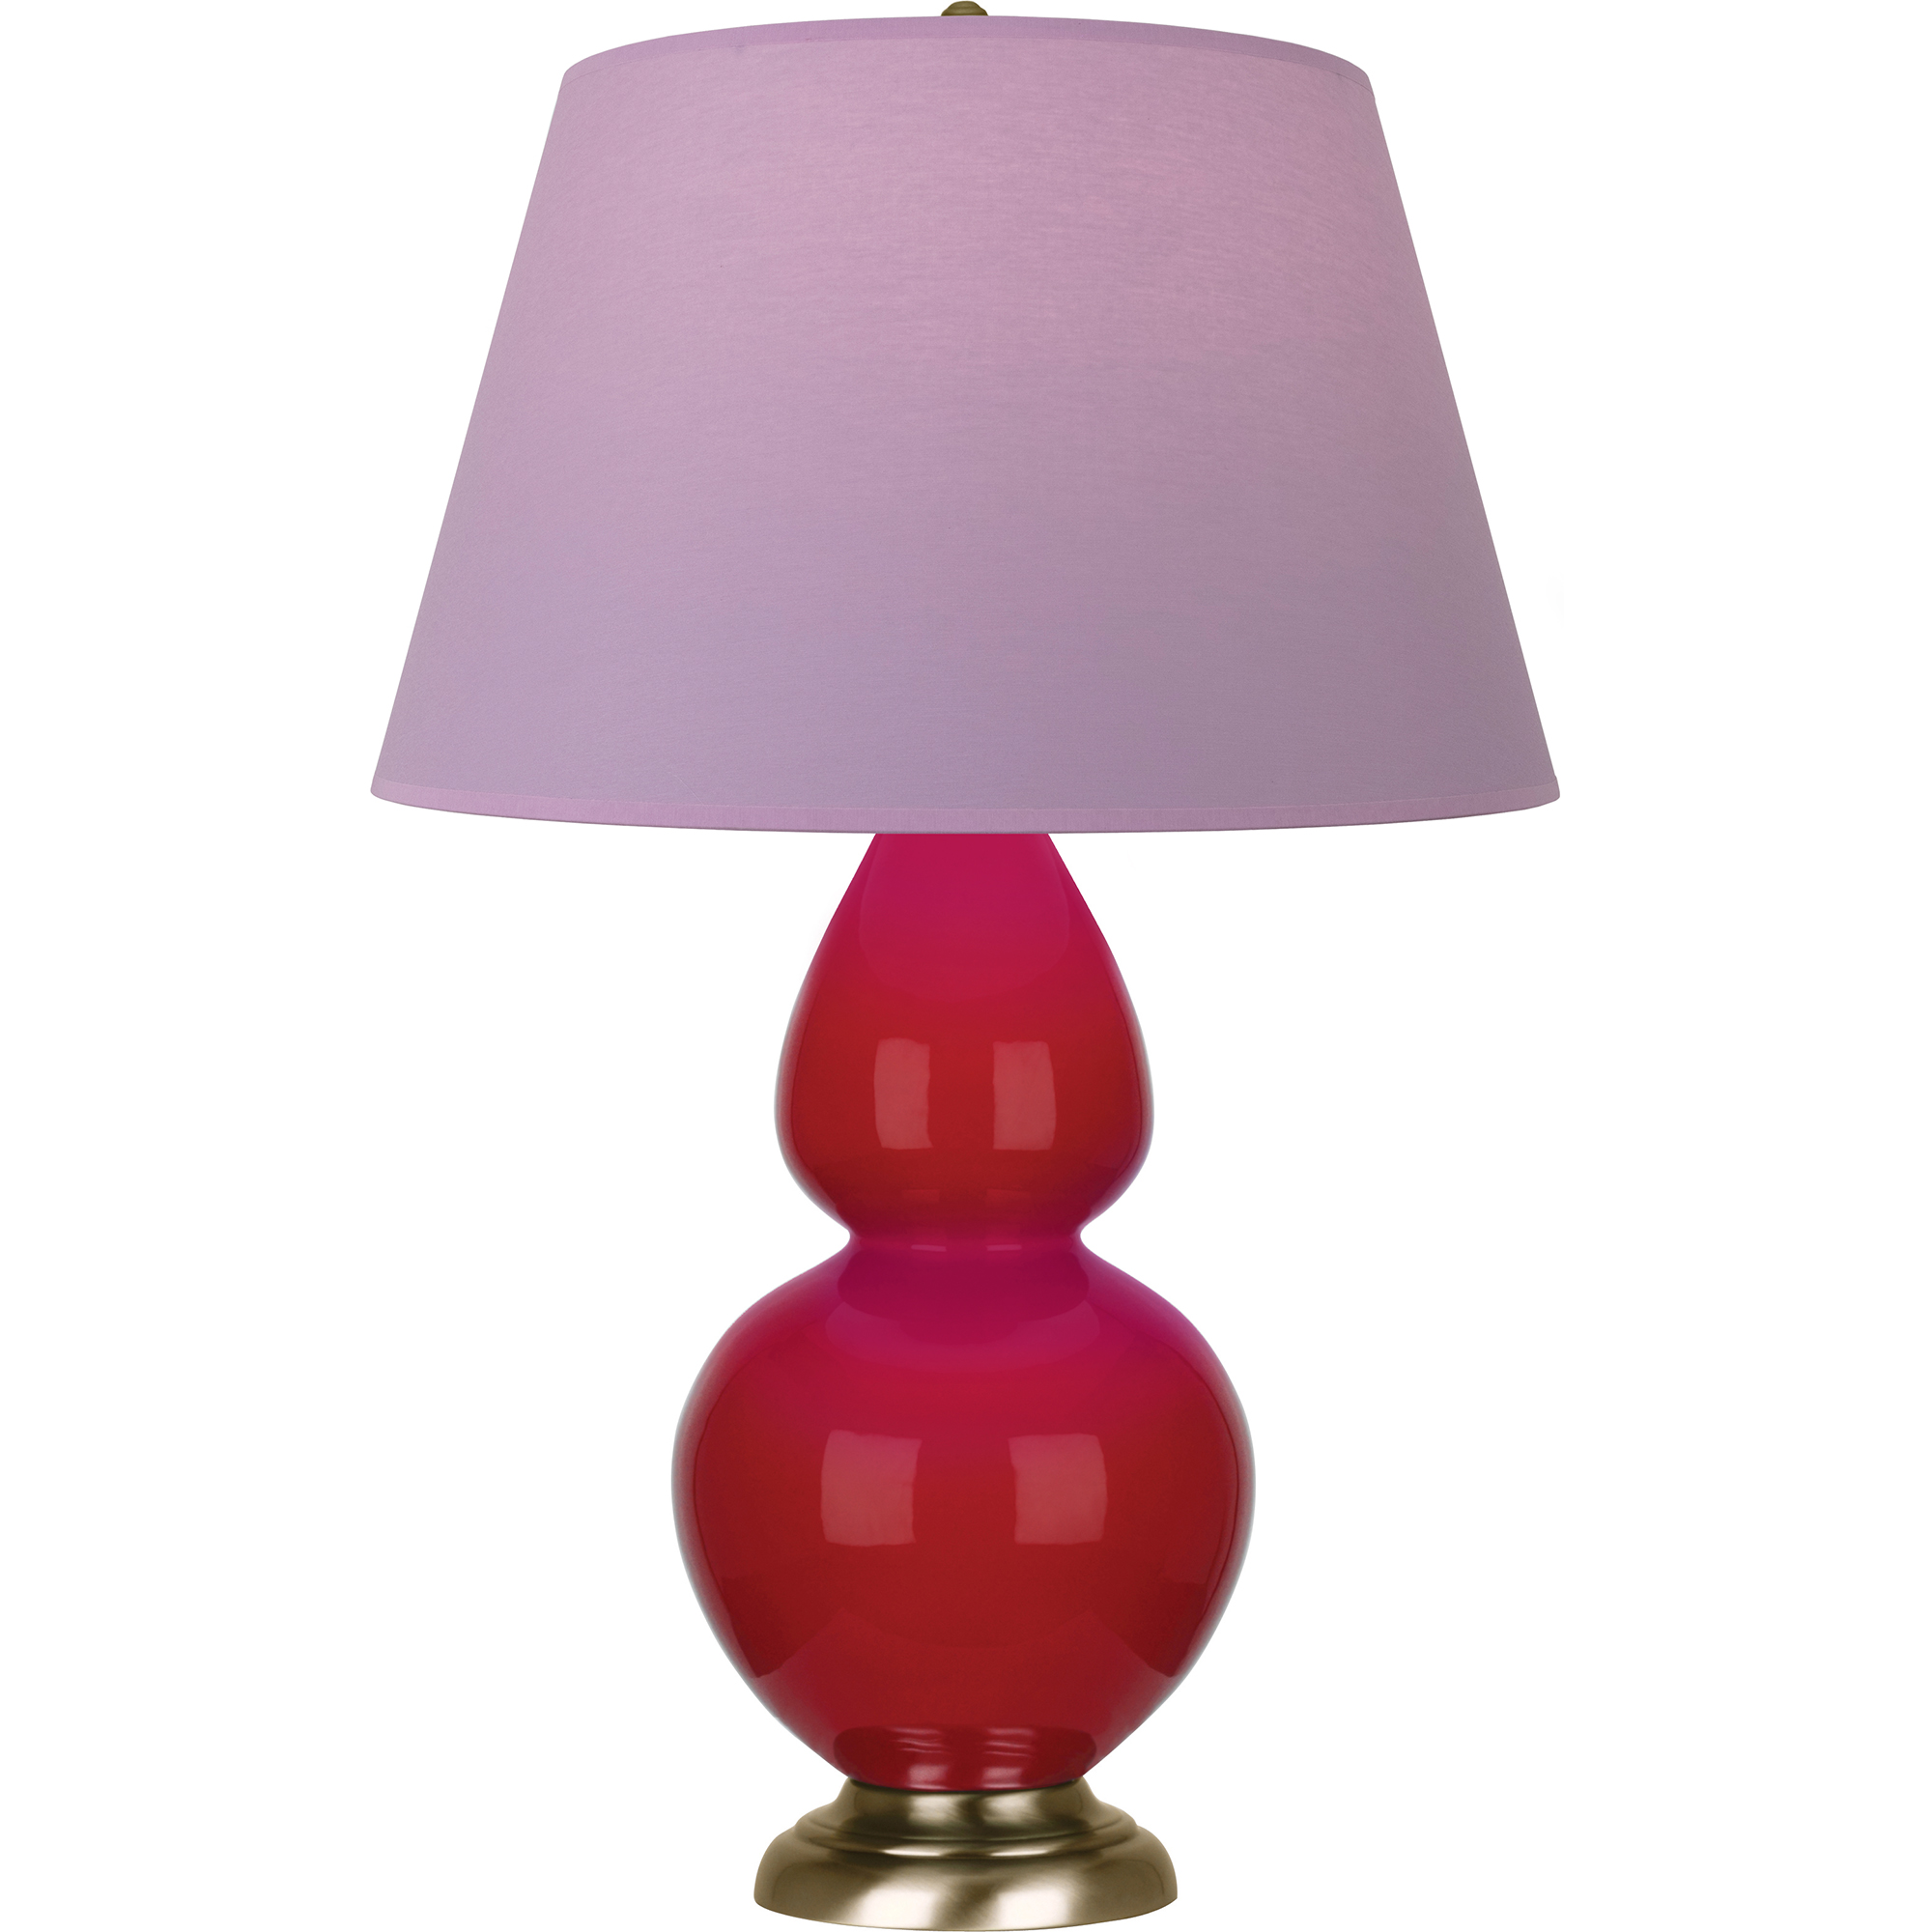 Double Gourd Table Lamp Style #RR20L